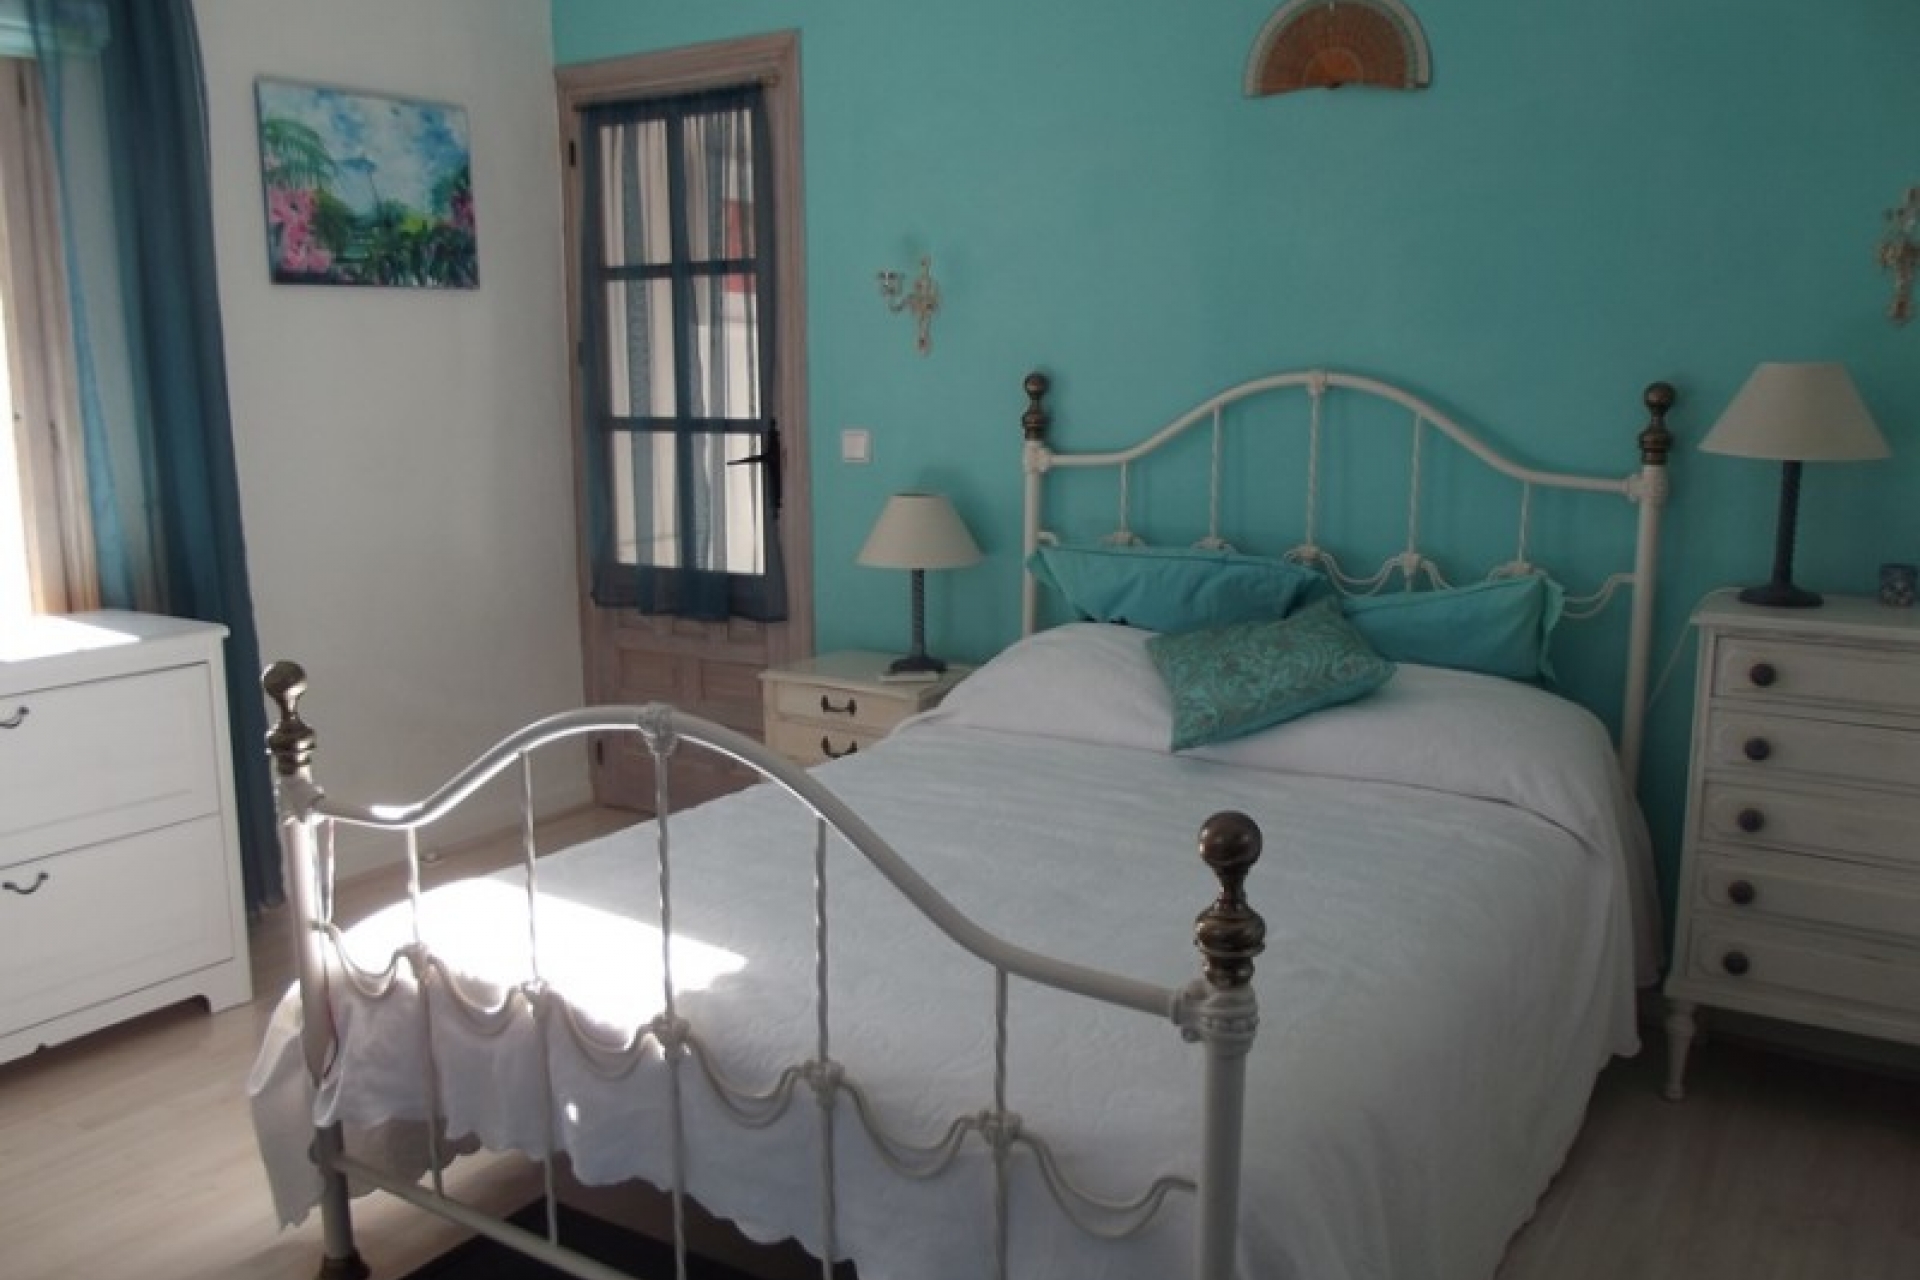 Los Montesinos bargian prperty for sale cheap property